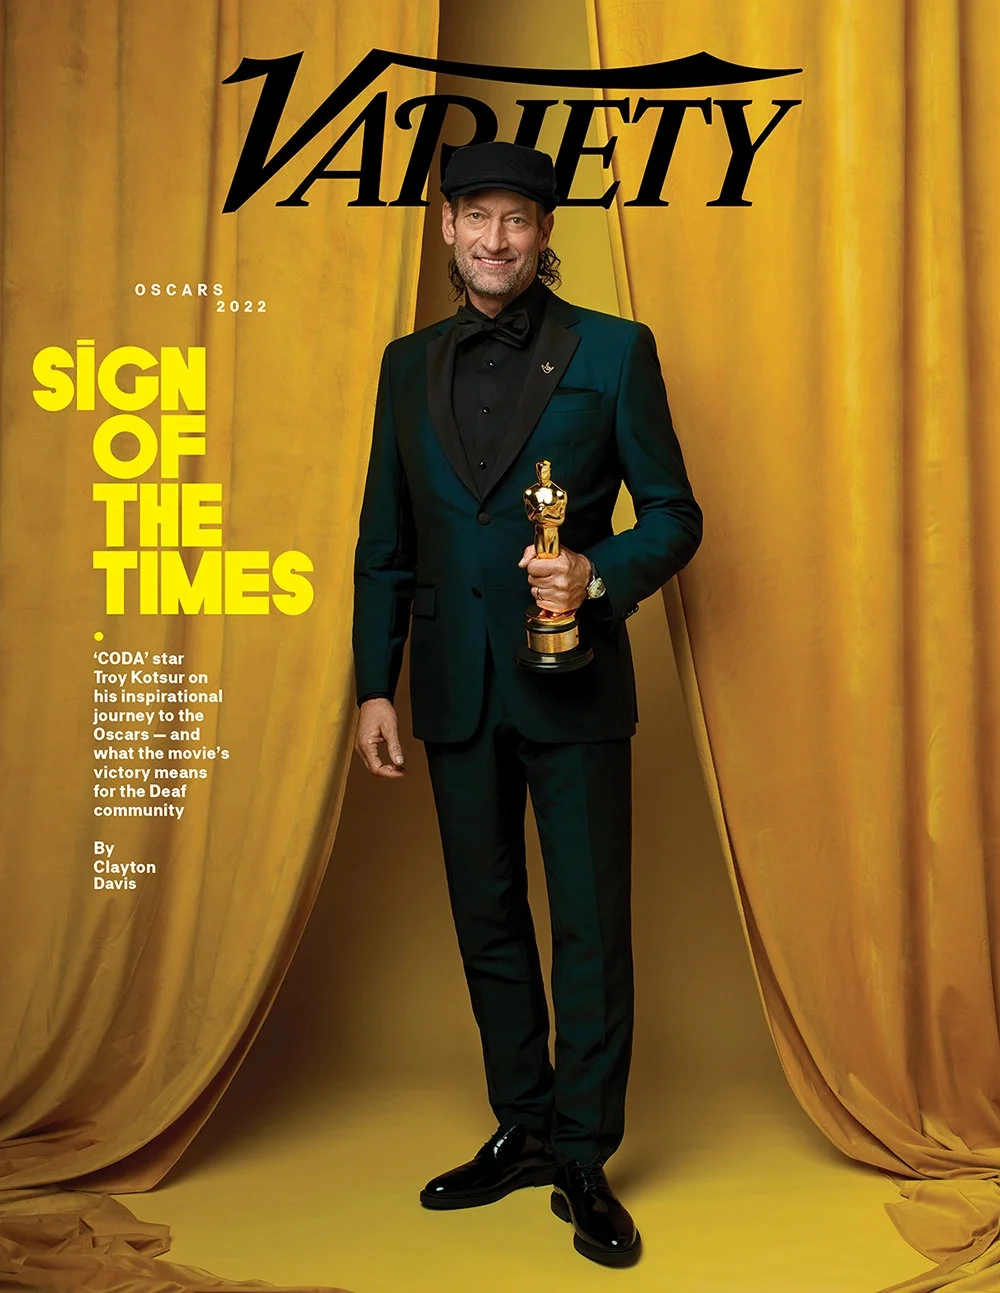 Troy Kotsur in "Variety" magazine ​​​with his Oscar trophy ​​​